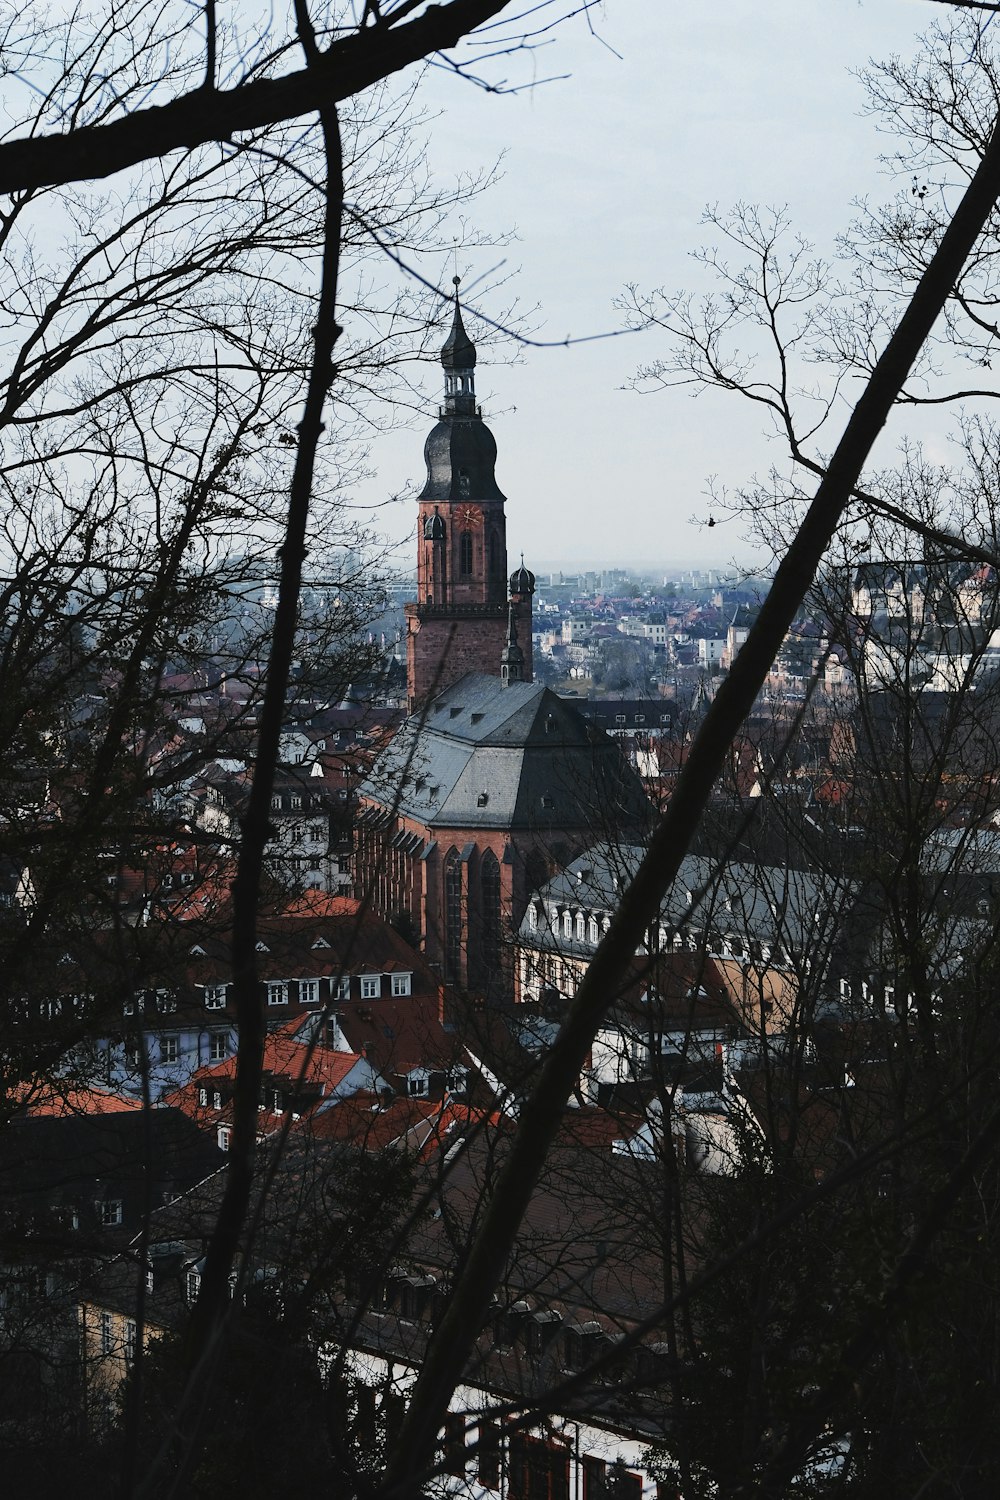 a view of a city with a clock tower